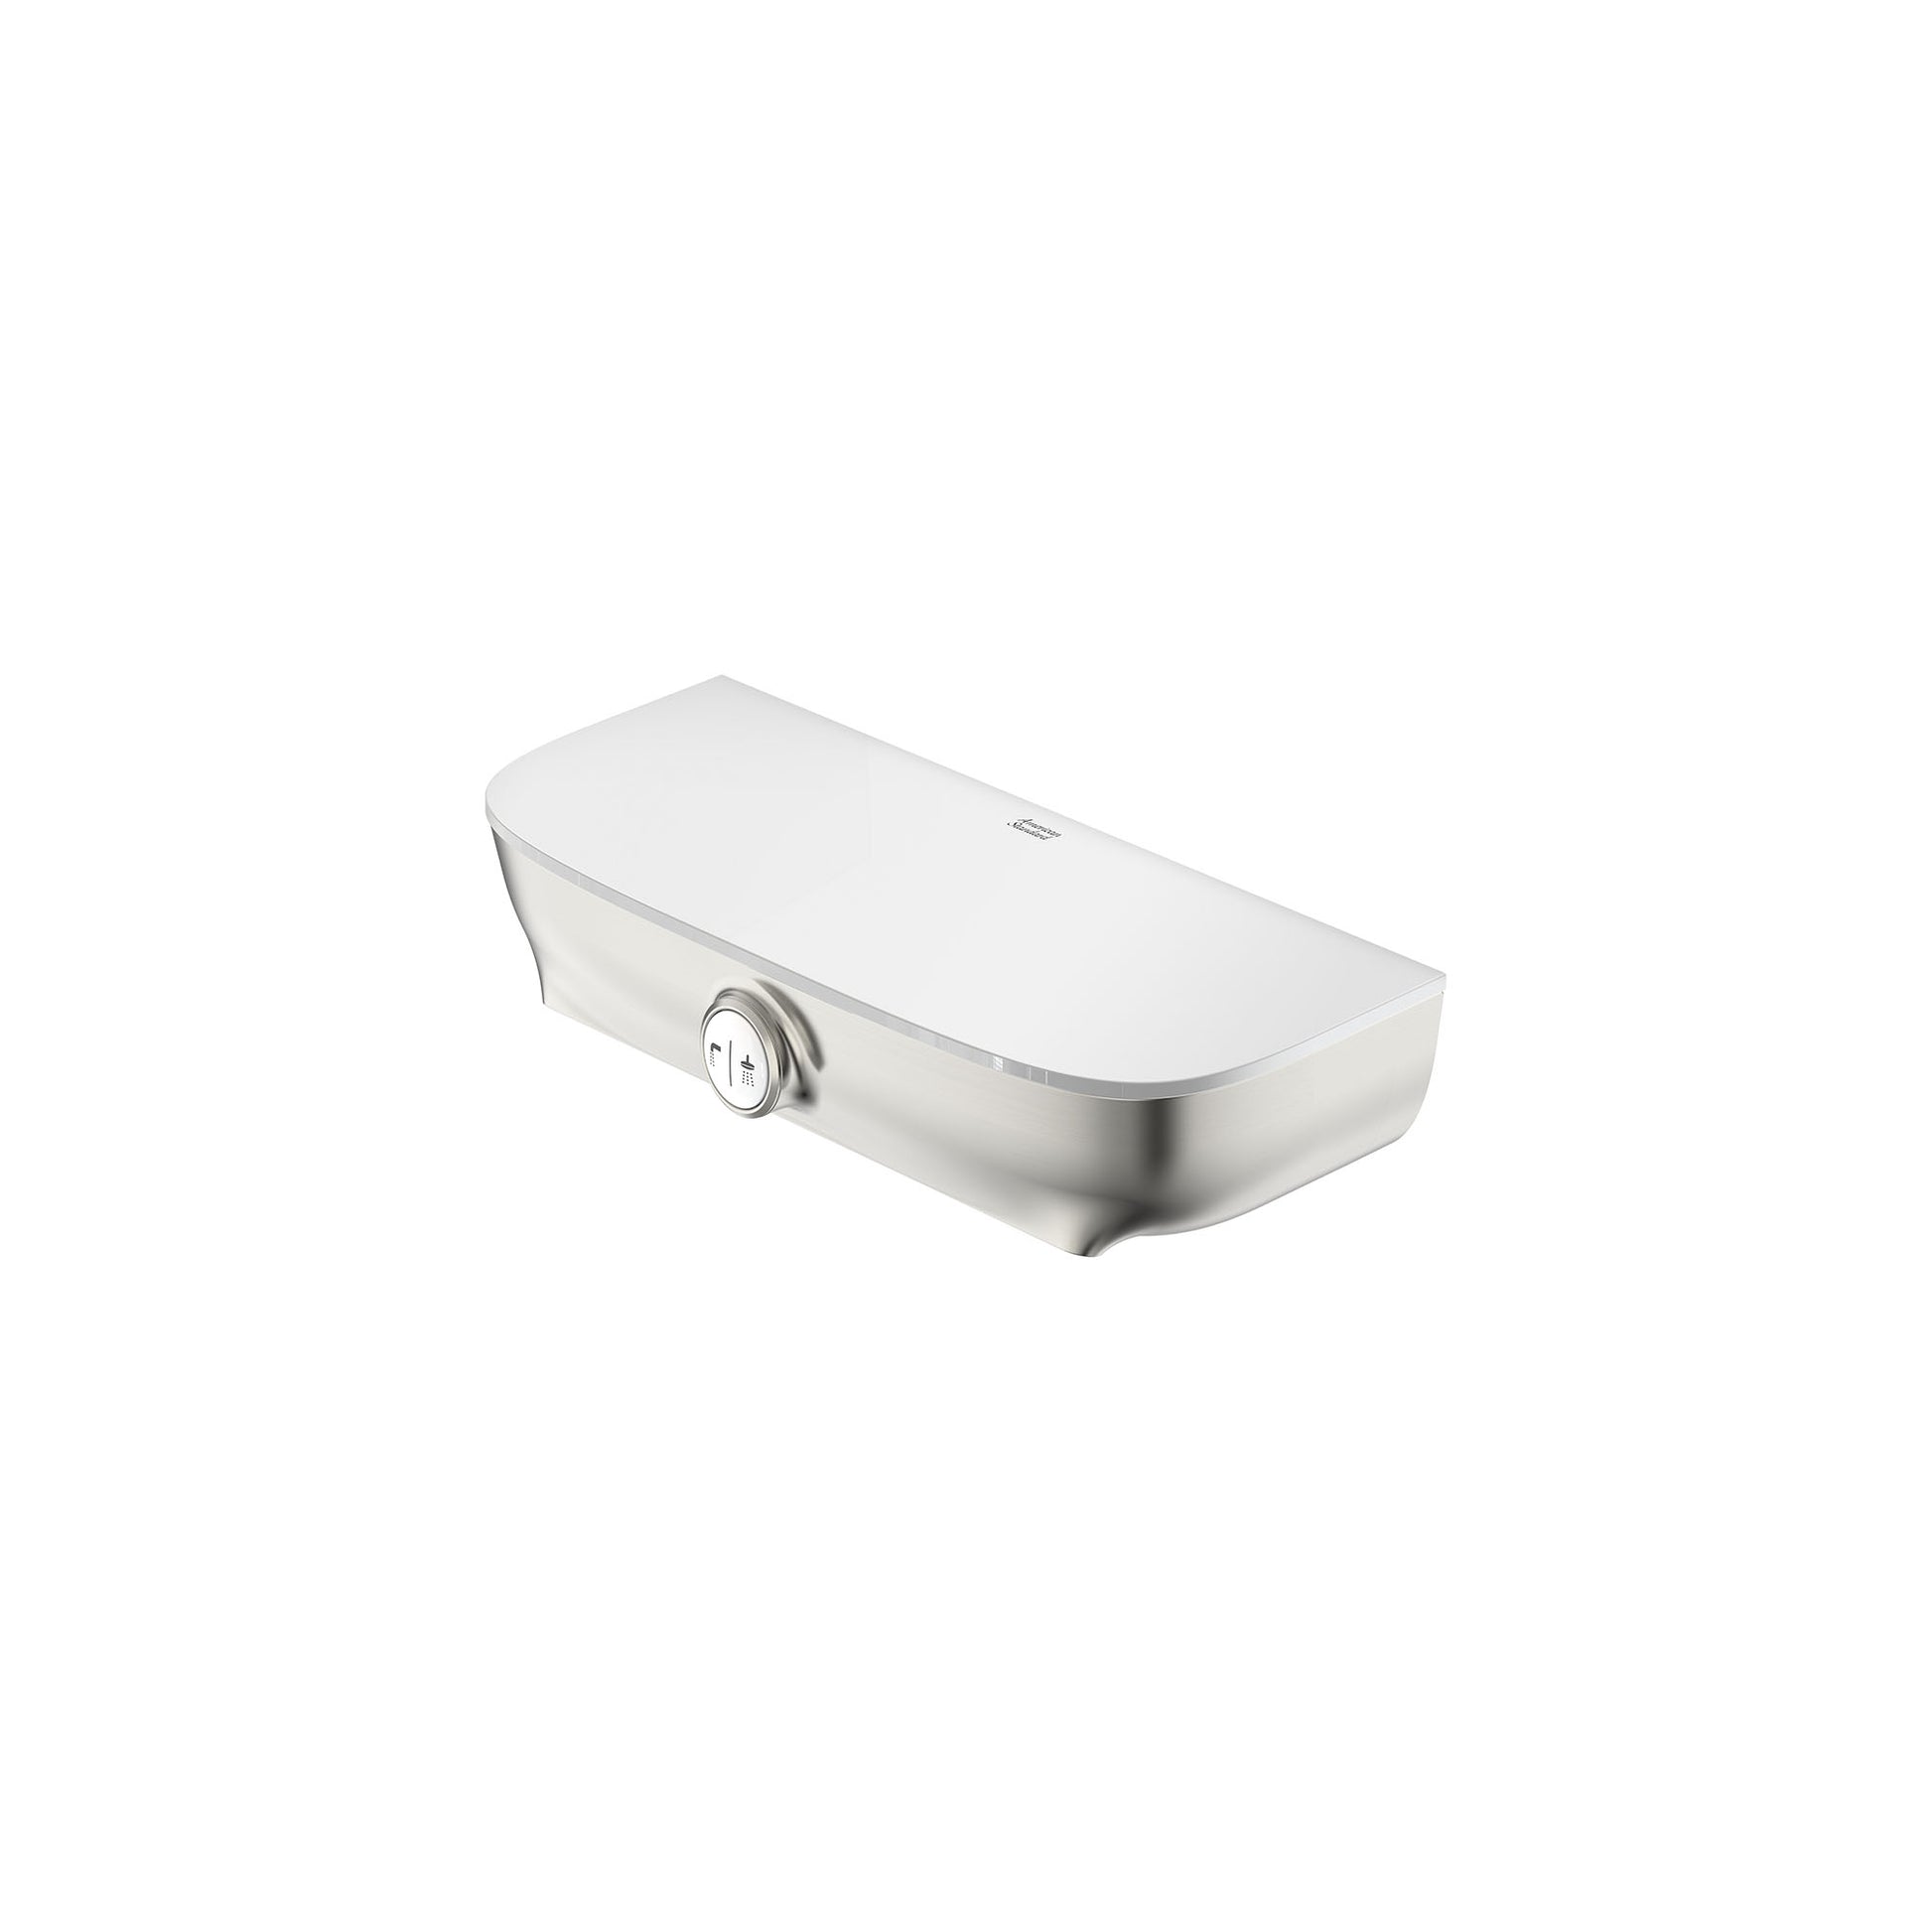 AMERICAN-STANDARD 8888116.295, Aspirations Diverting Waterfall Tub Spout in Brushed Nickel